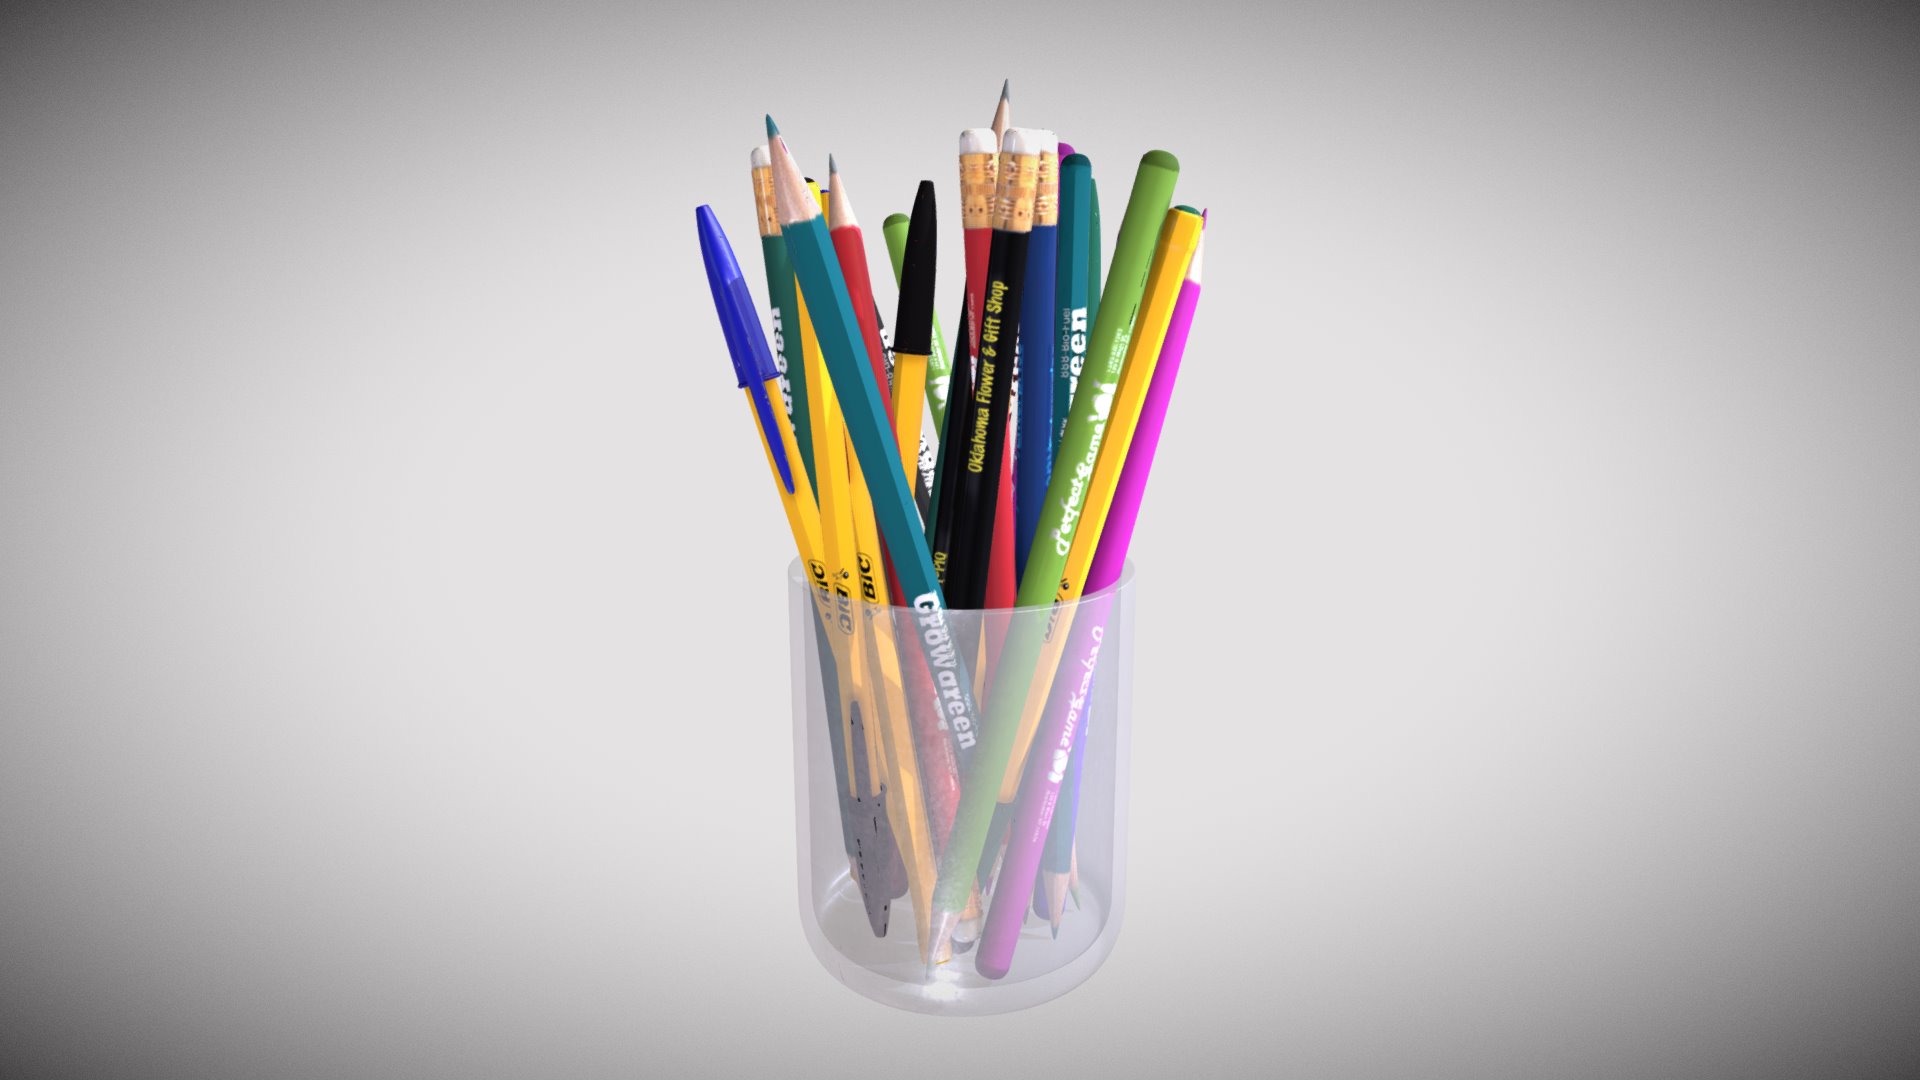 3D model Pens in the Glass _One Material - This is a 3D model of the Pens in the Glass _One Material. The 3D model is about a group of colored pencils in a glass cup.